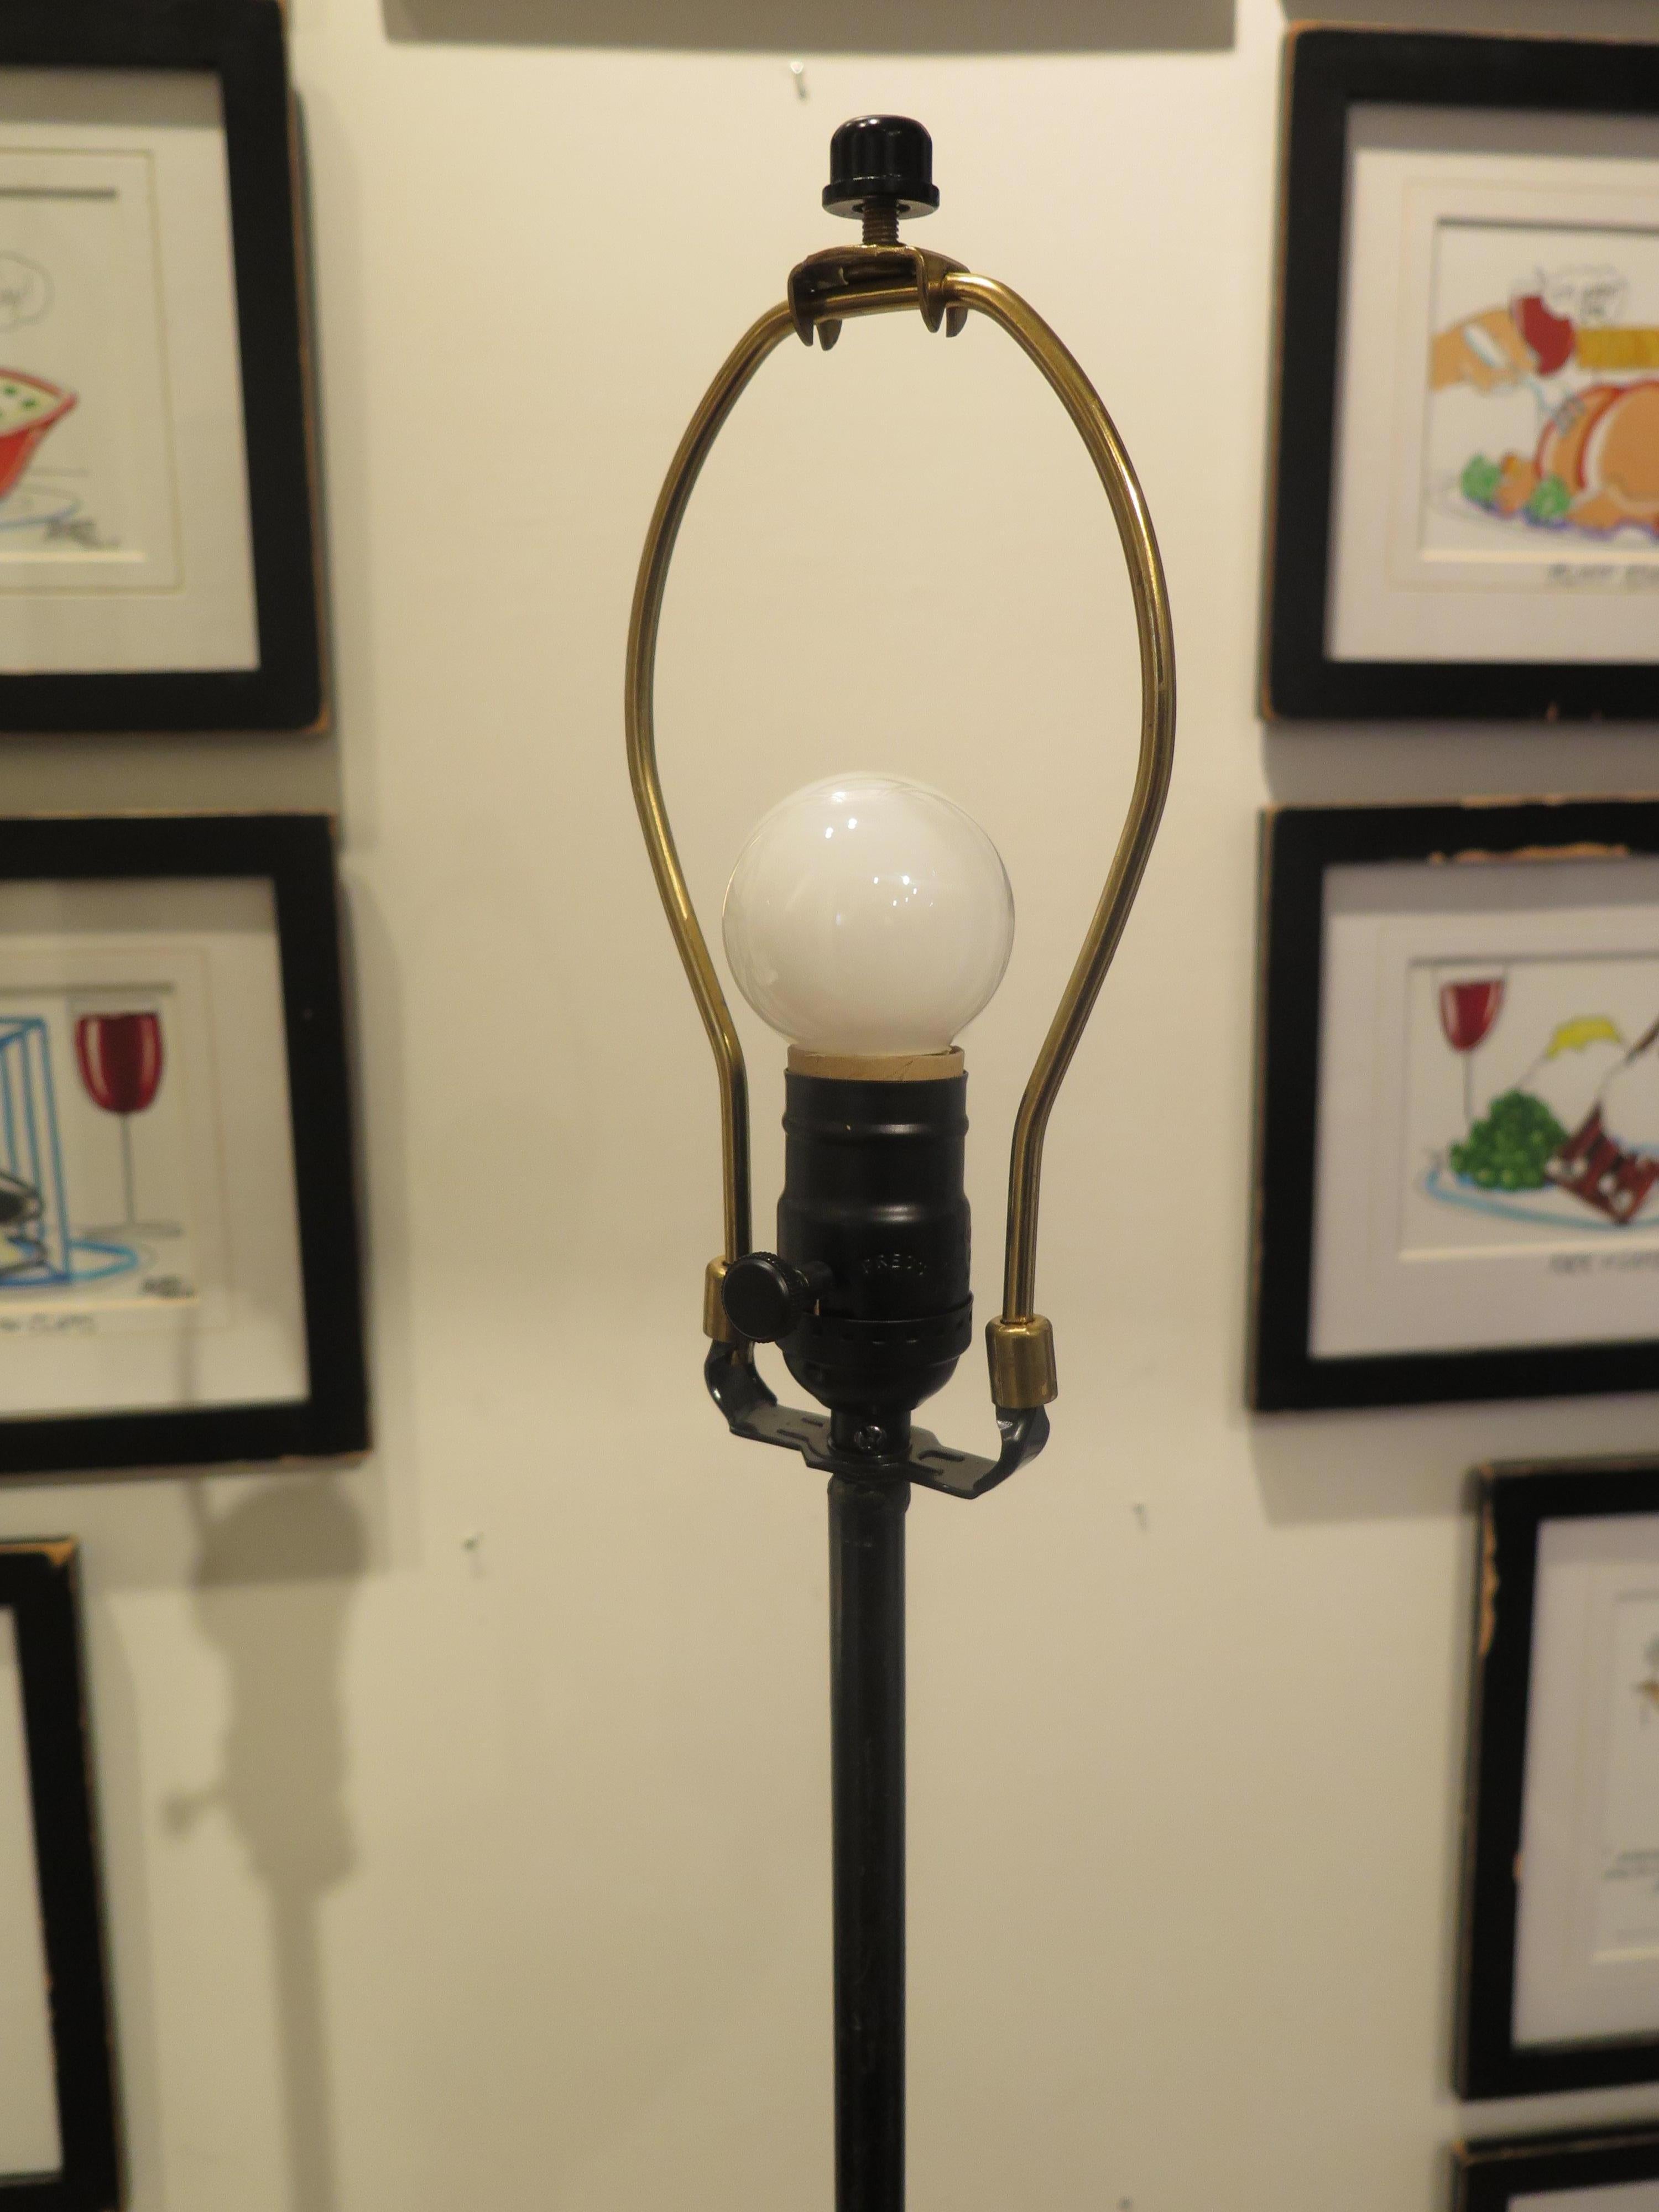 Midcentury black and gold torchiere already wired and ready for use. Floor lamp measures 49.5